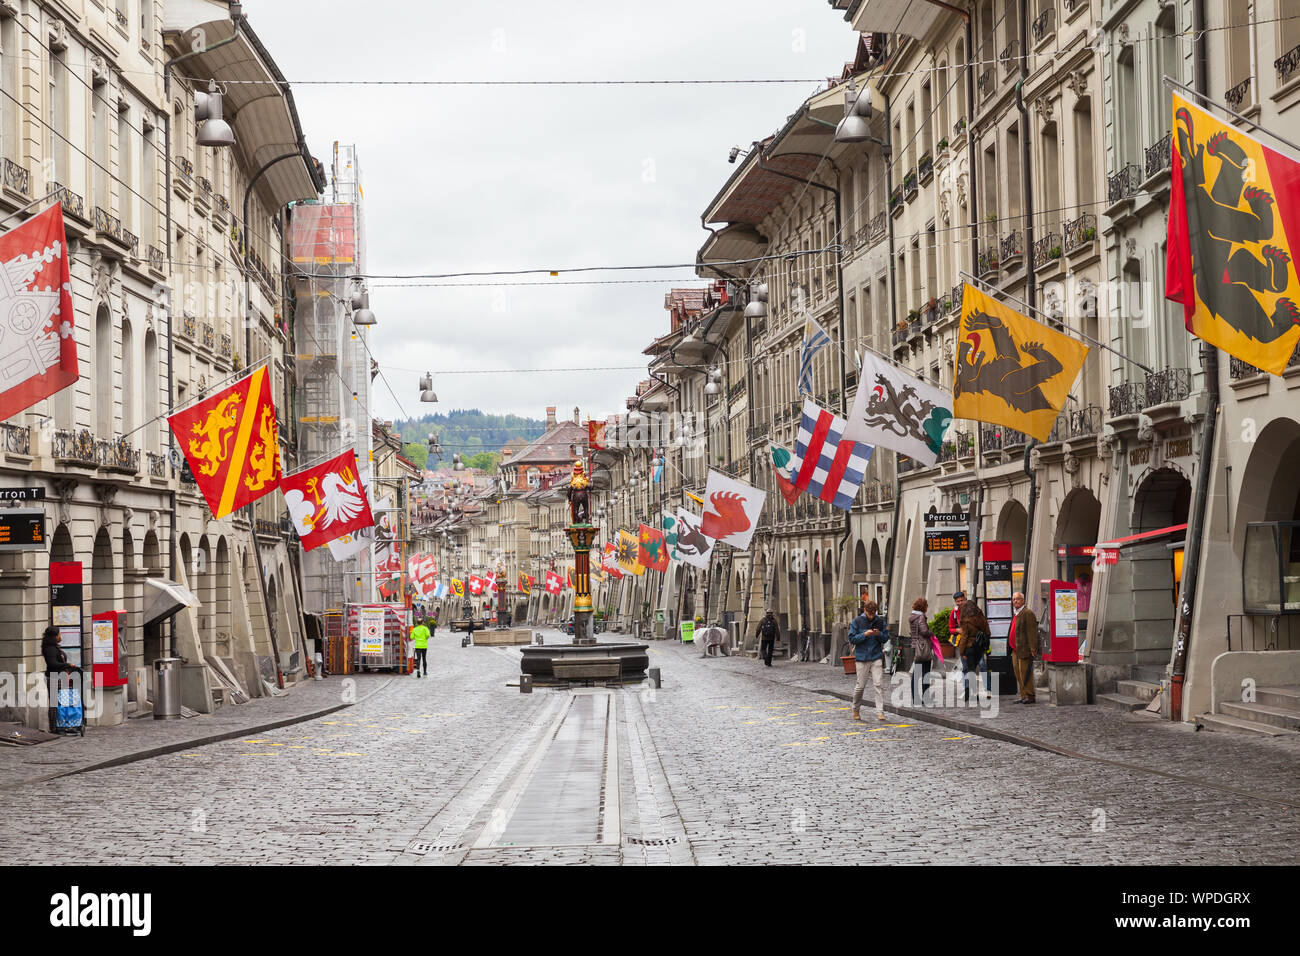 Bern, Switzerland - May 7, 2017: Street view of Grocers Alley. It is one of the principal streets in the Old City of Bern. People walk under colorful Stock Photo